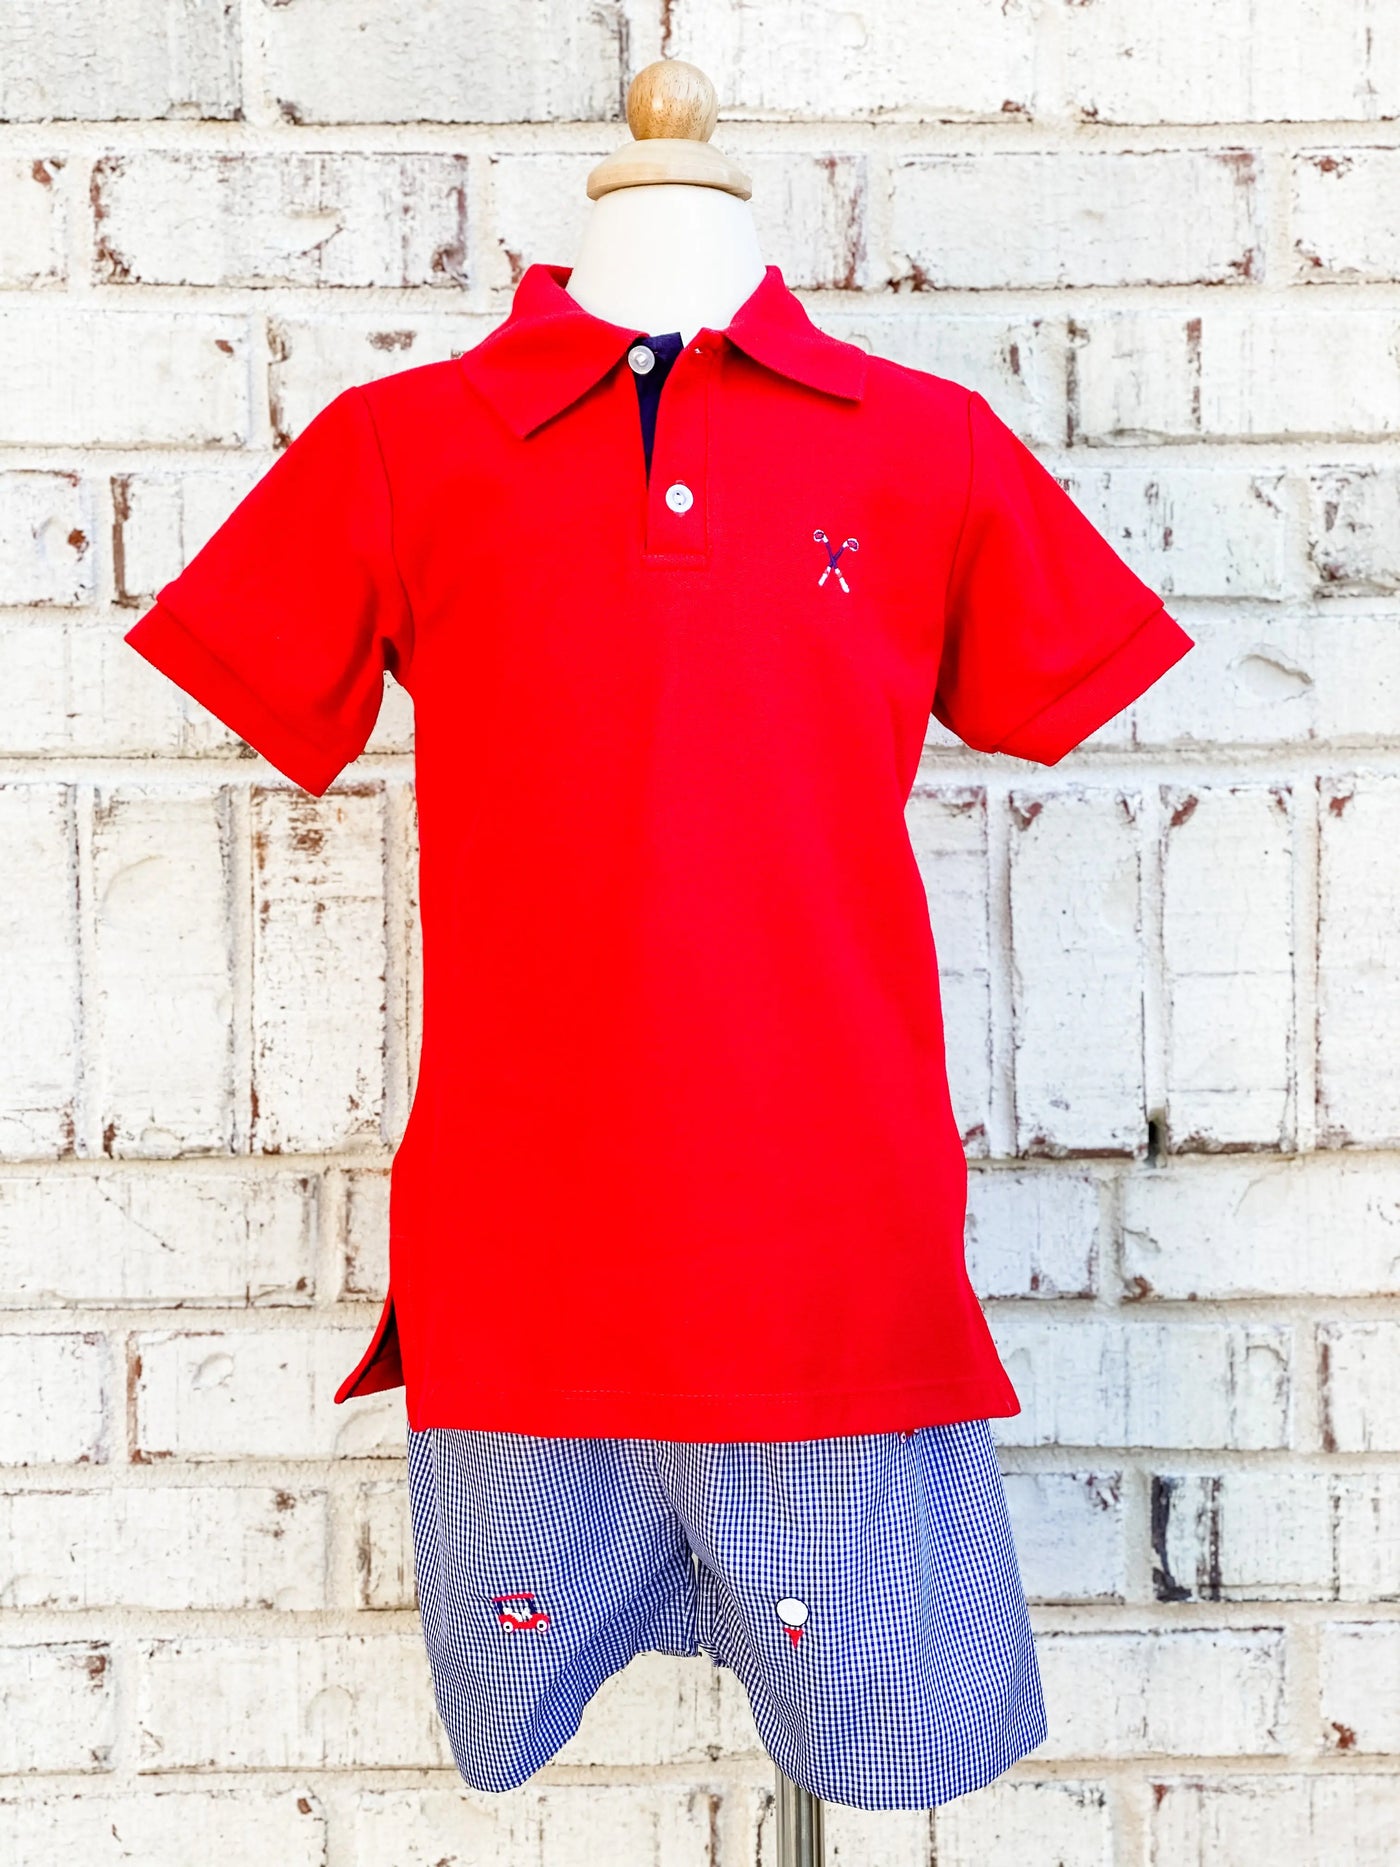 Golf Embroidered Red Pique Polo Shirt Zuccini Kids